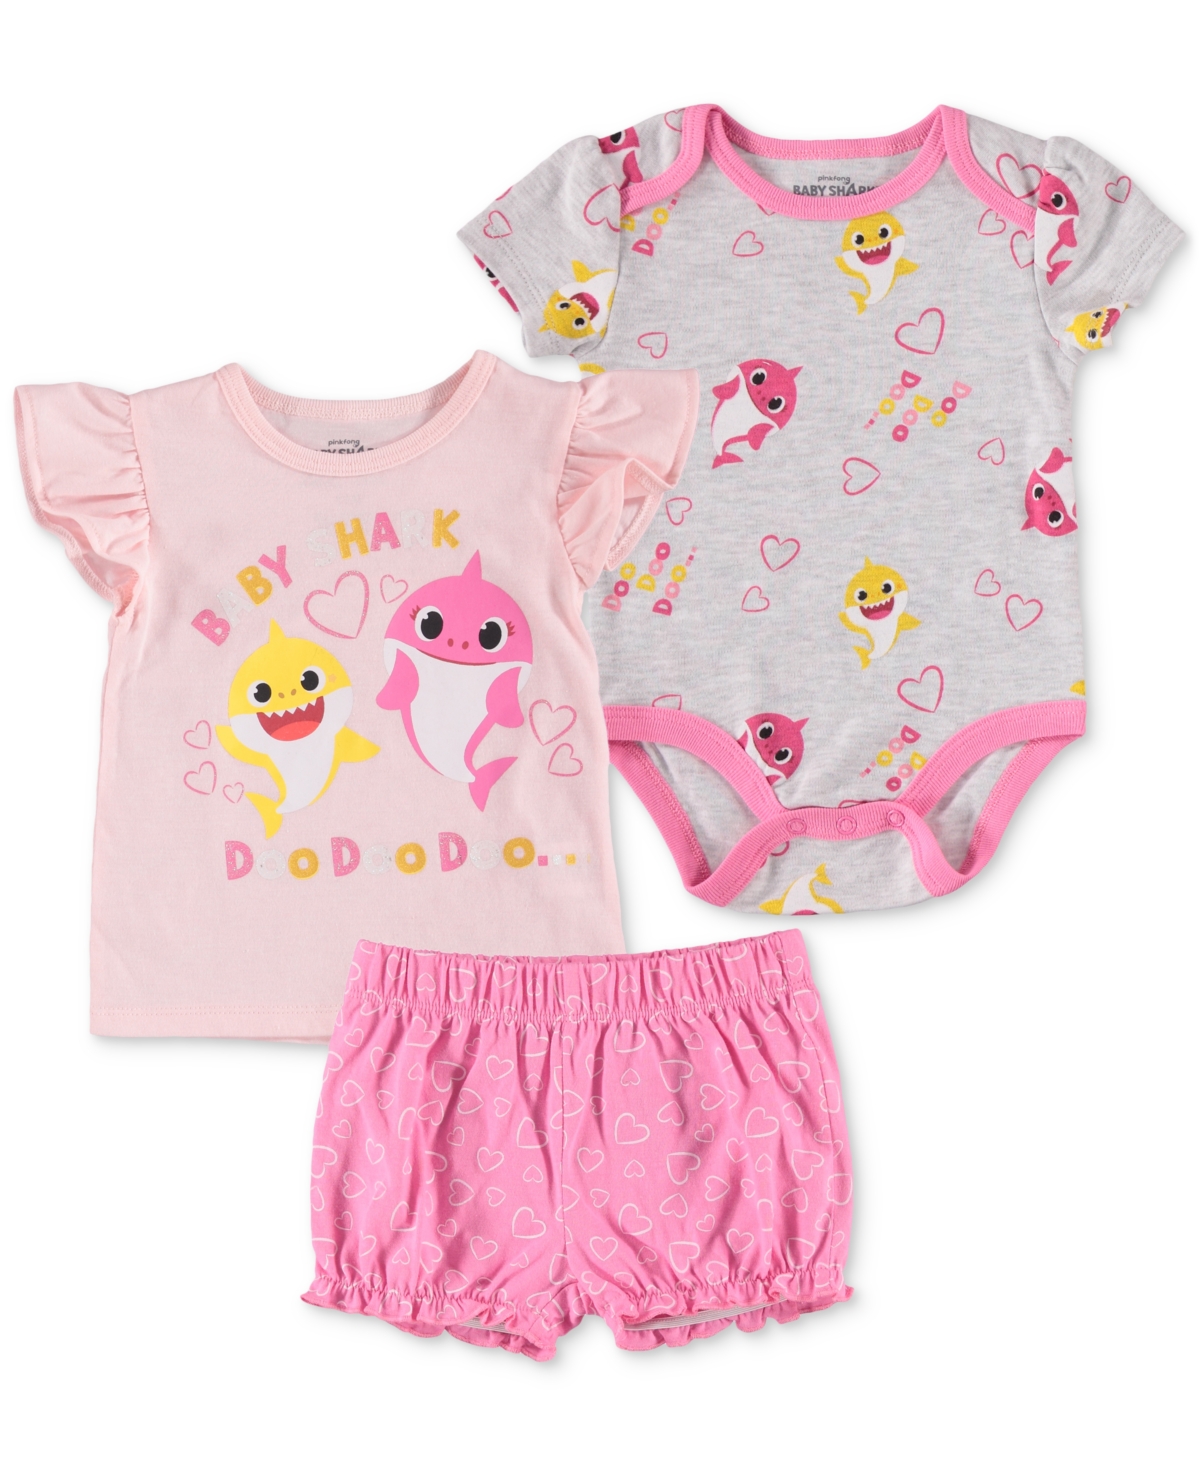 Happy Threads Baby Girls Baby Shark Bodysuit, T Shirt And Shorts, 2 Piece Set In Pink Multi